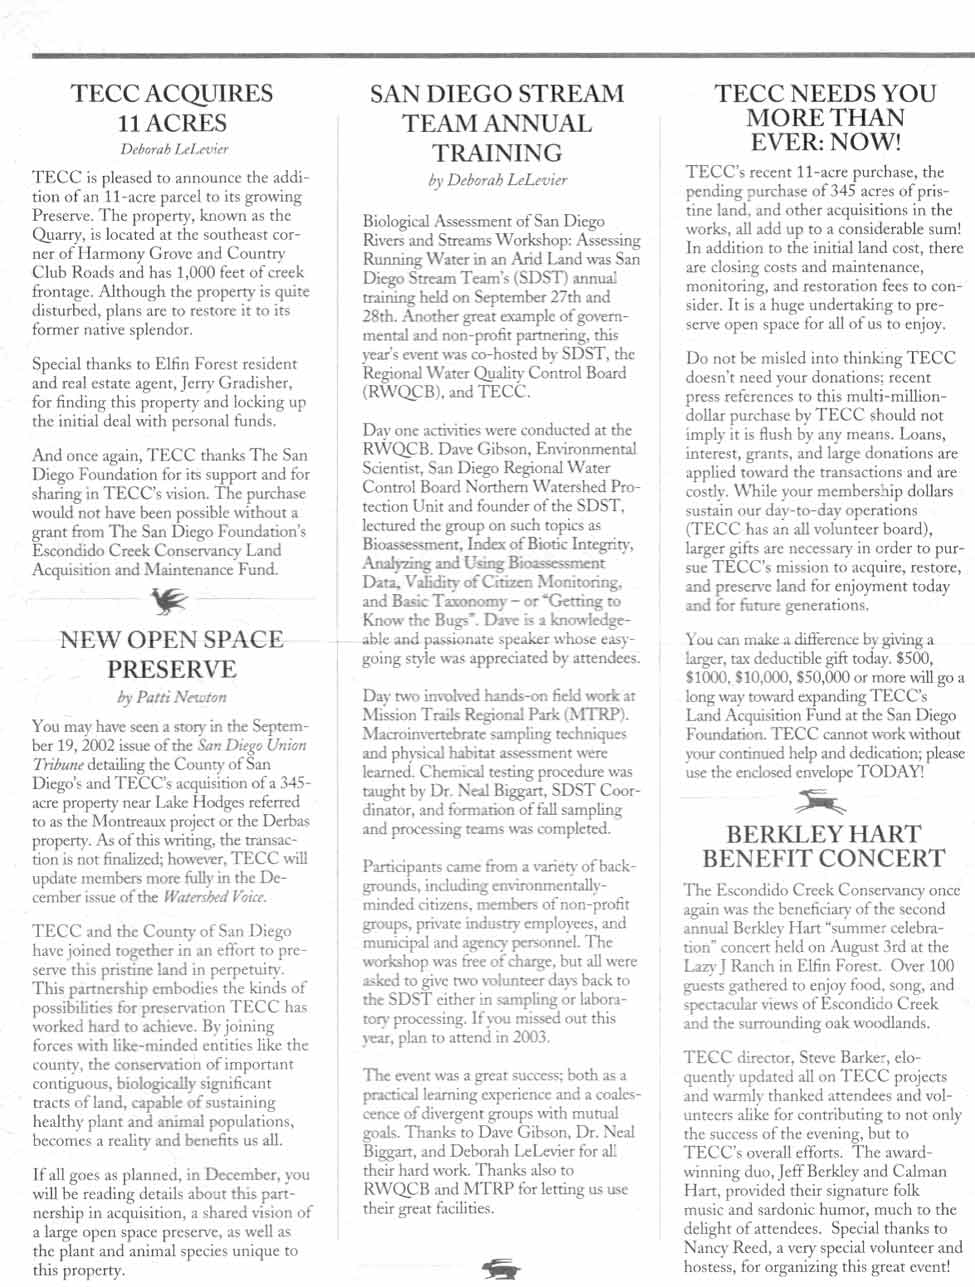 TECC Fall 2002 newsletter Page 2